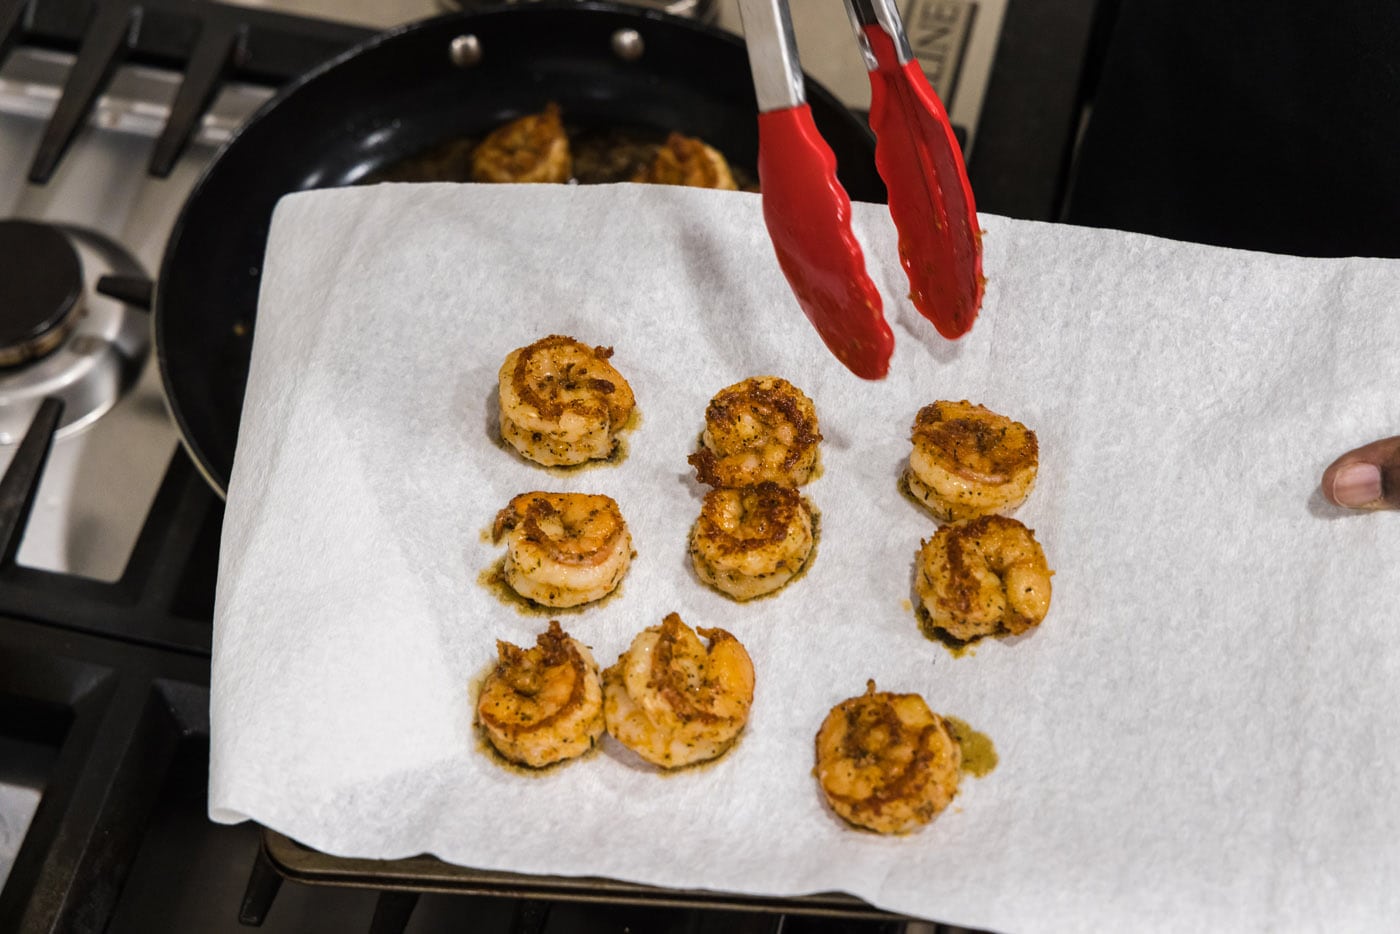 tongs moving cooked shrimp to a paper towel to drain